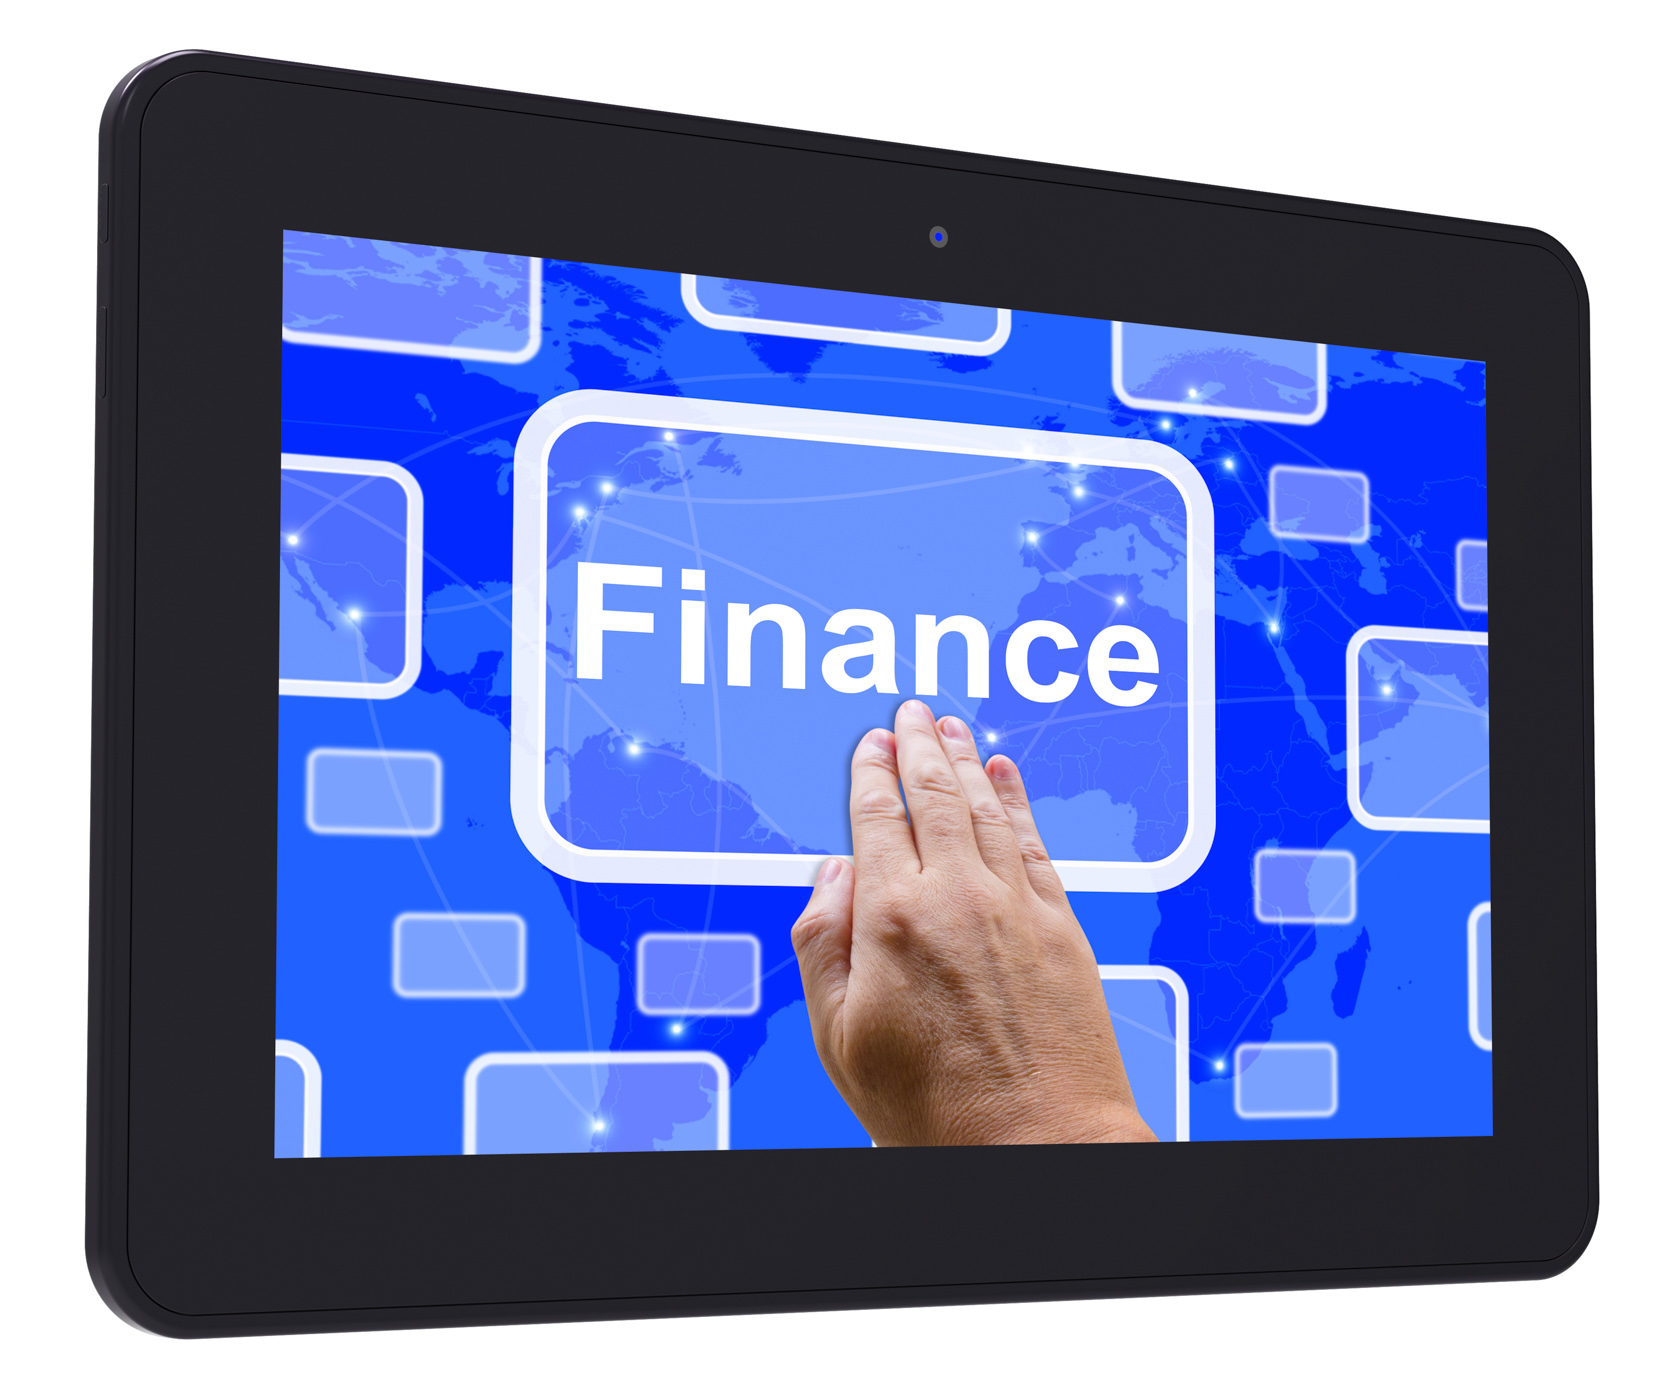 Finance tablet touch screen means money investment photo